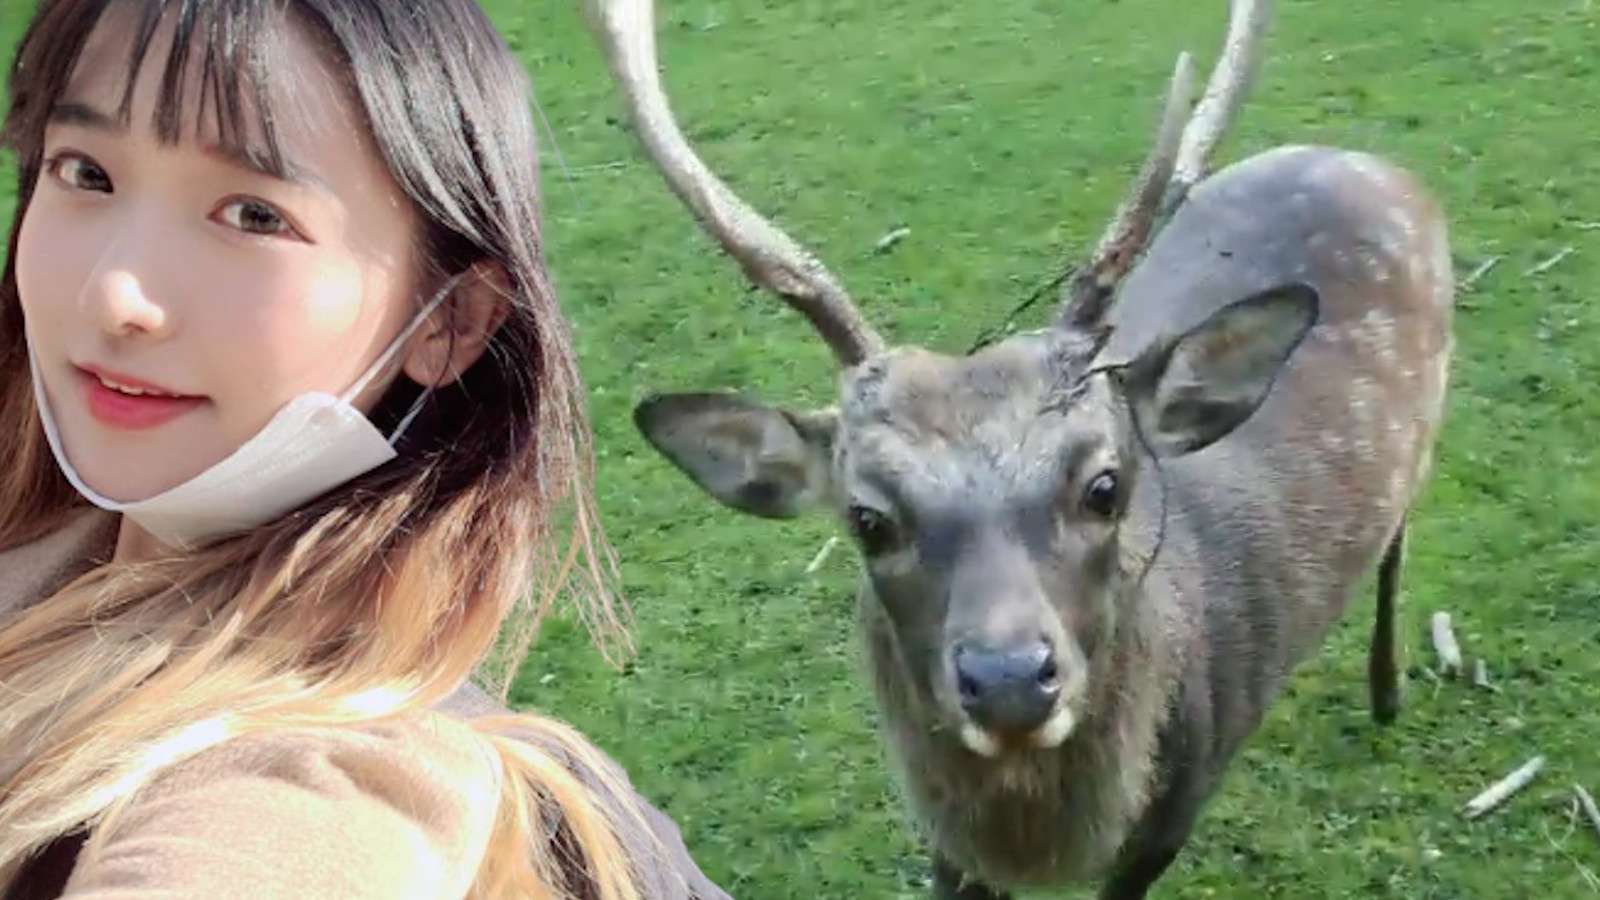 Jinny attacked by deer